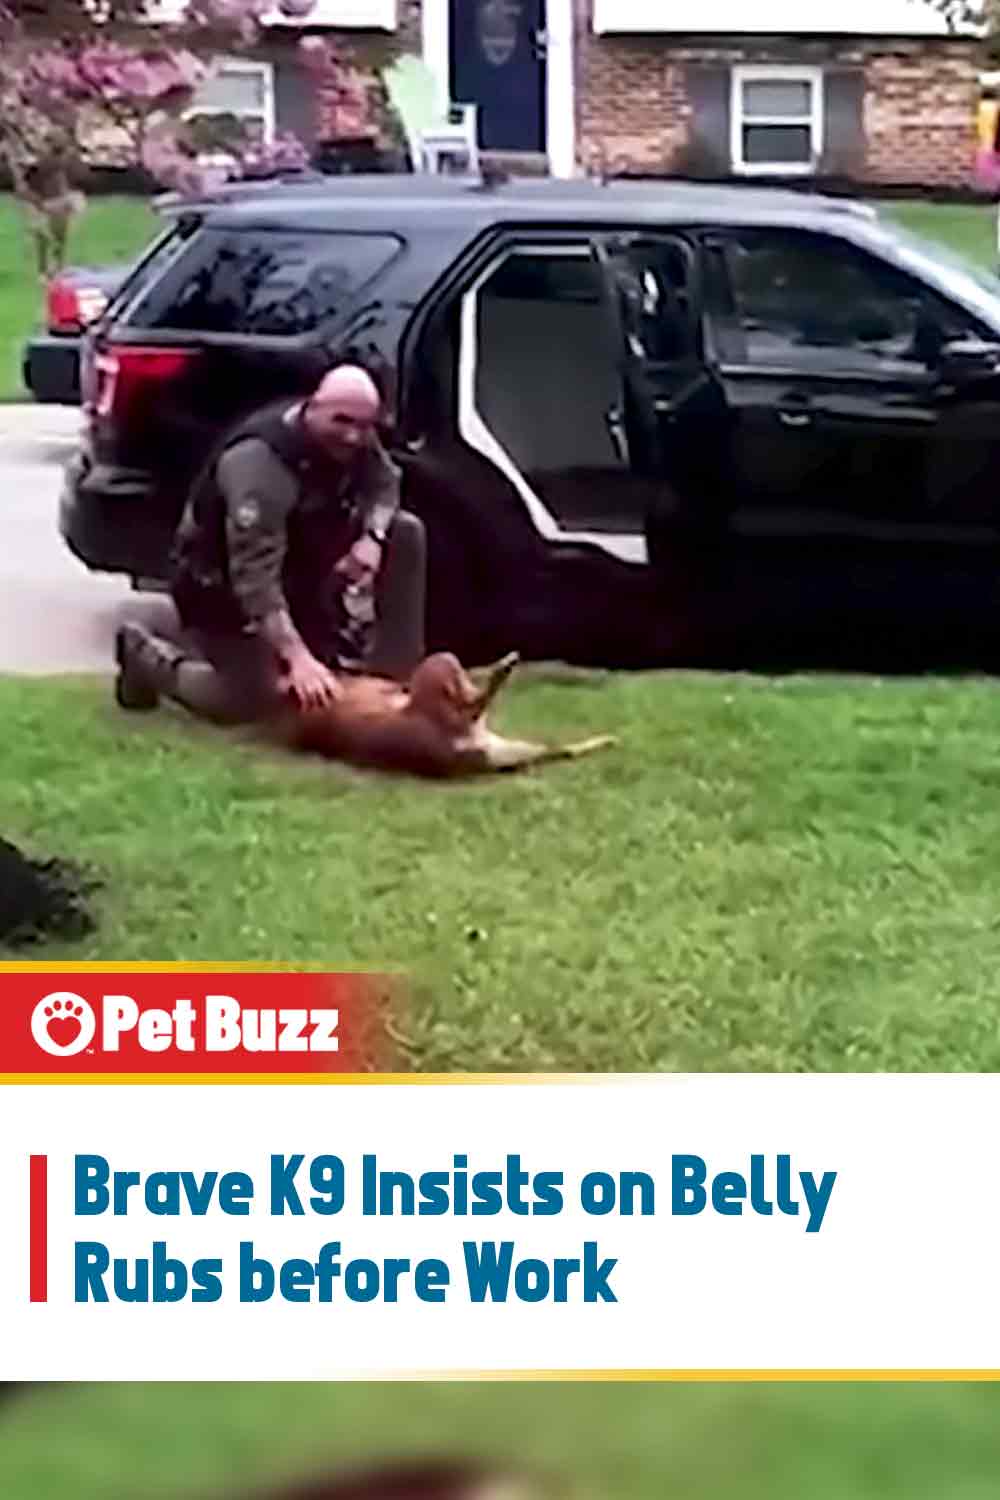 Brave K9 Insists on Belly Rubs before Work